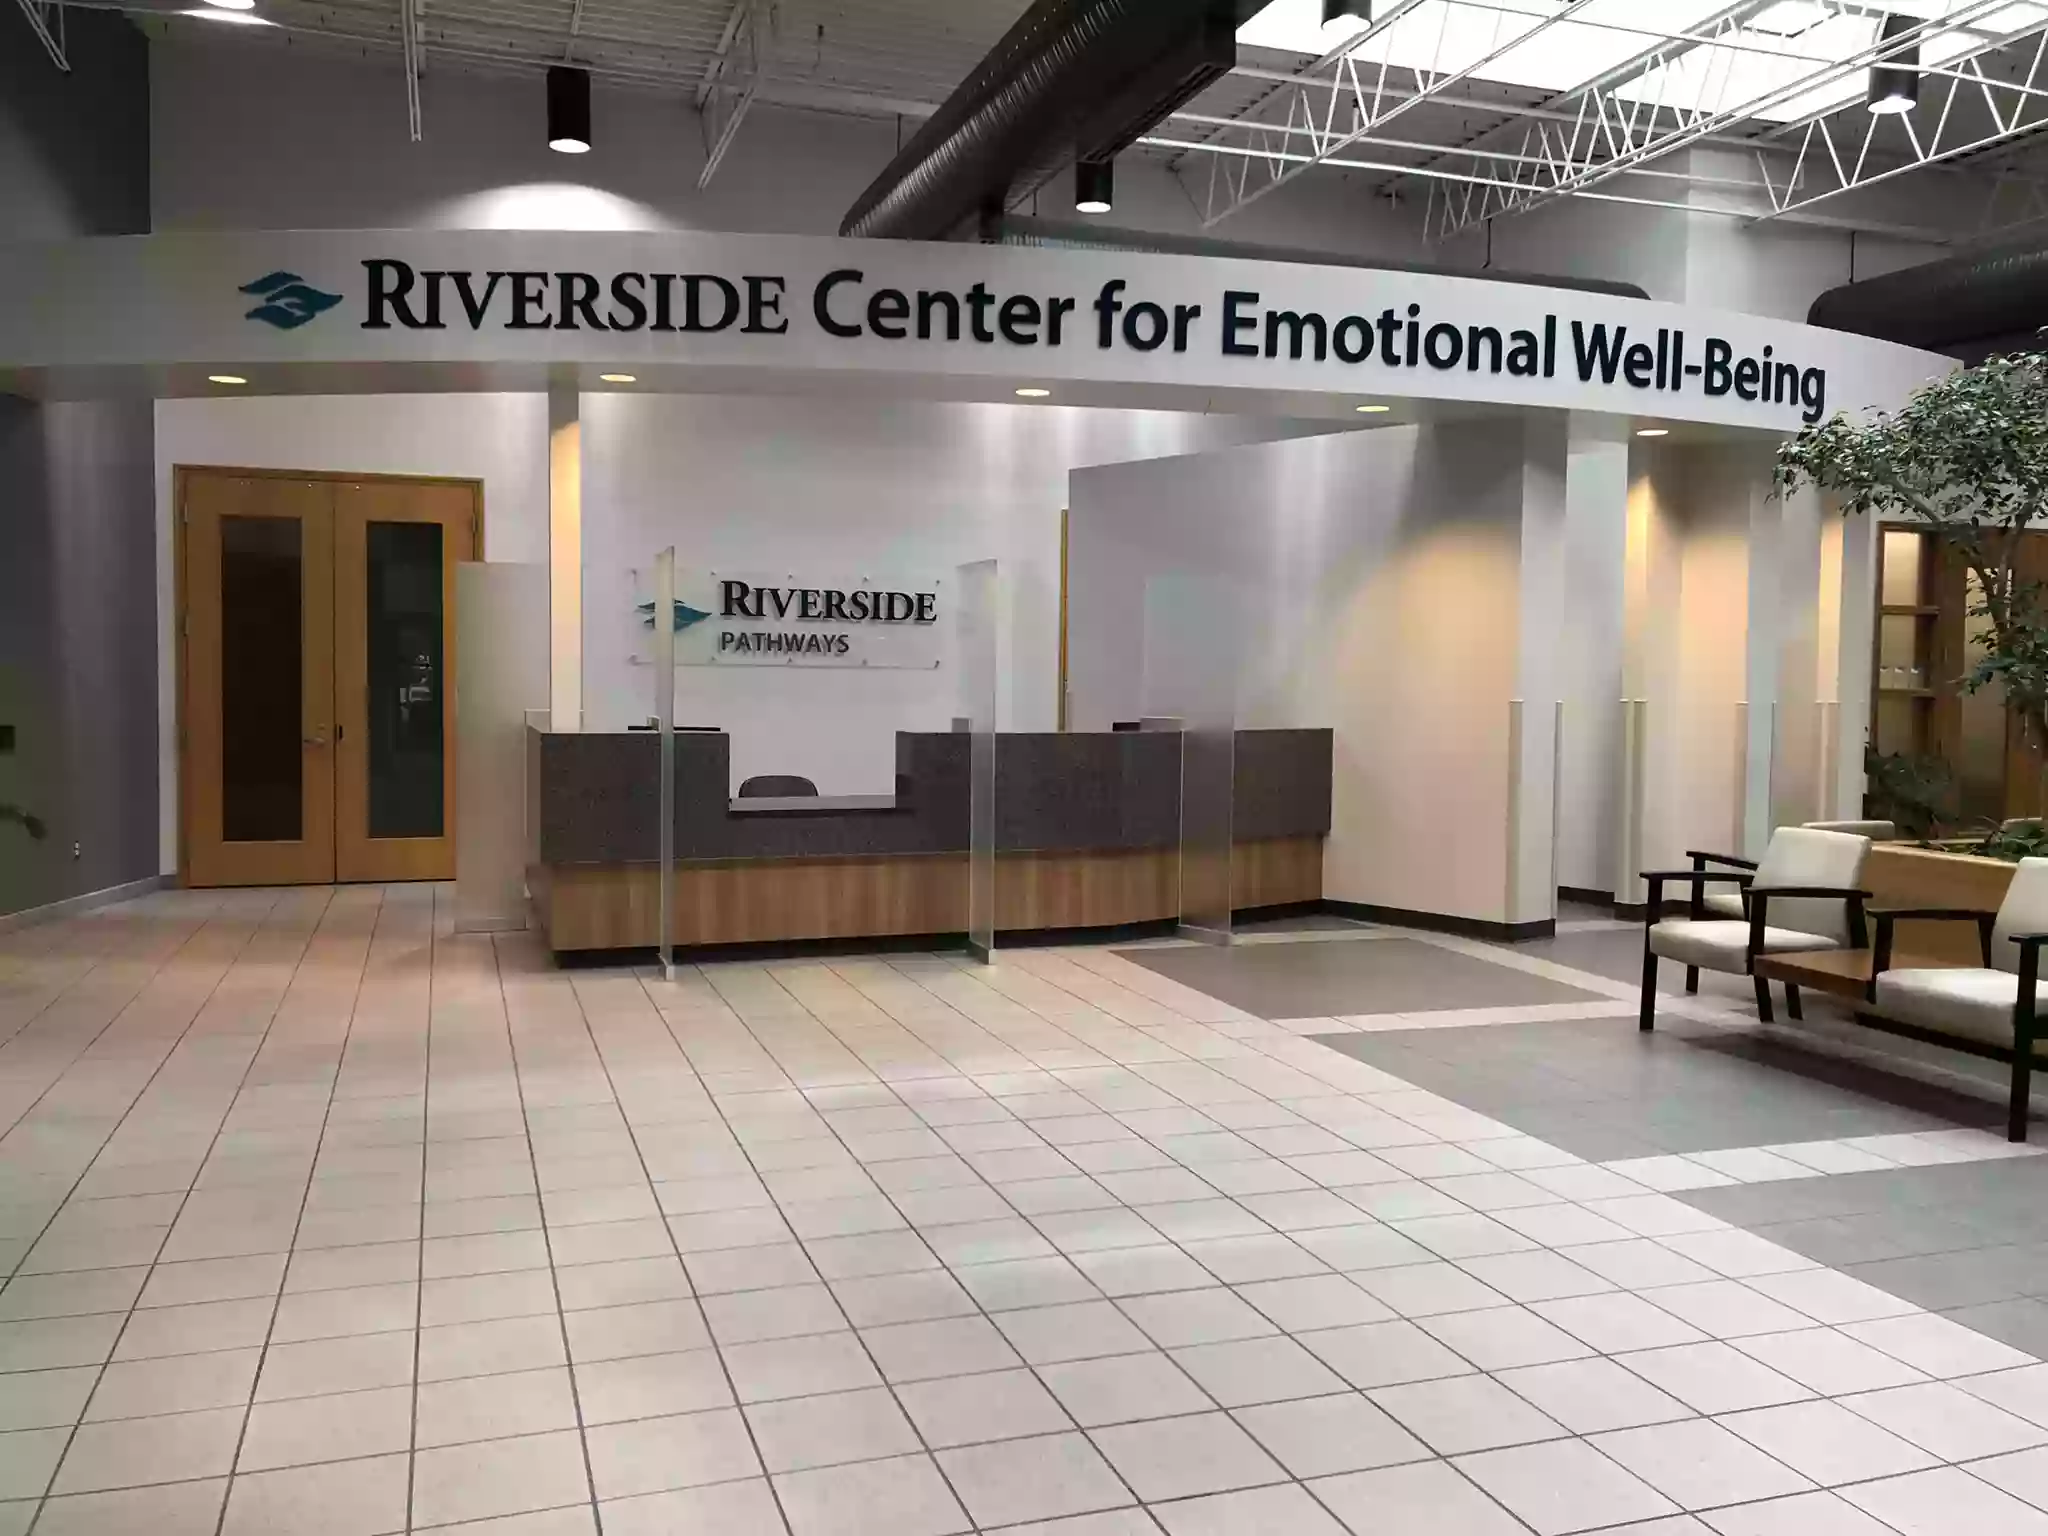 Riverside Center for Emotional Well-Being